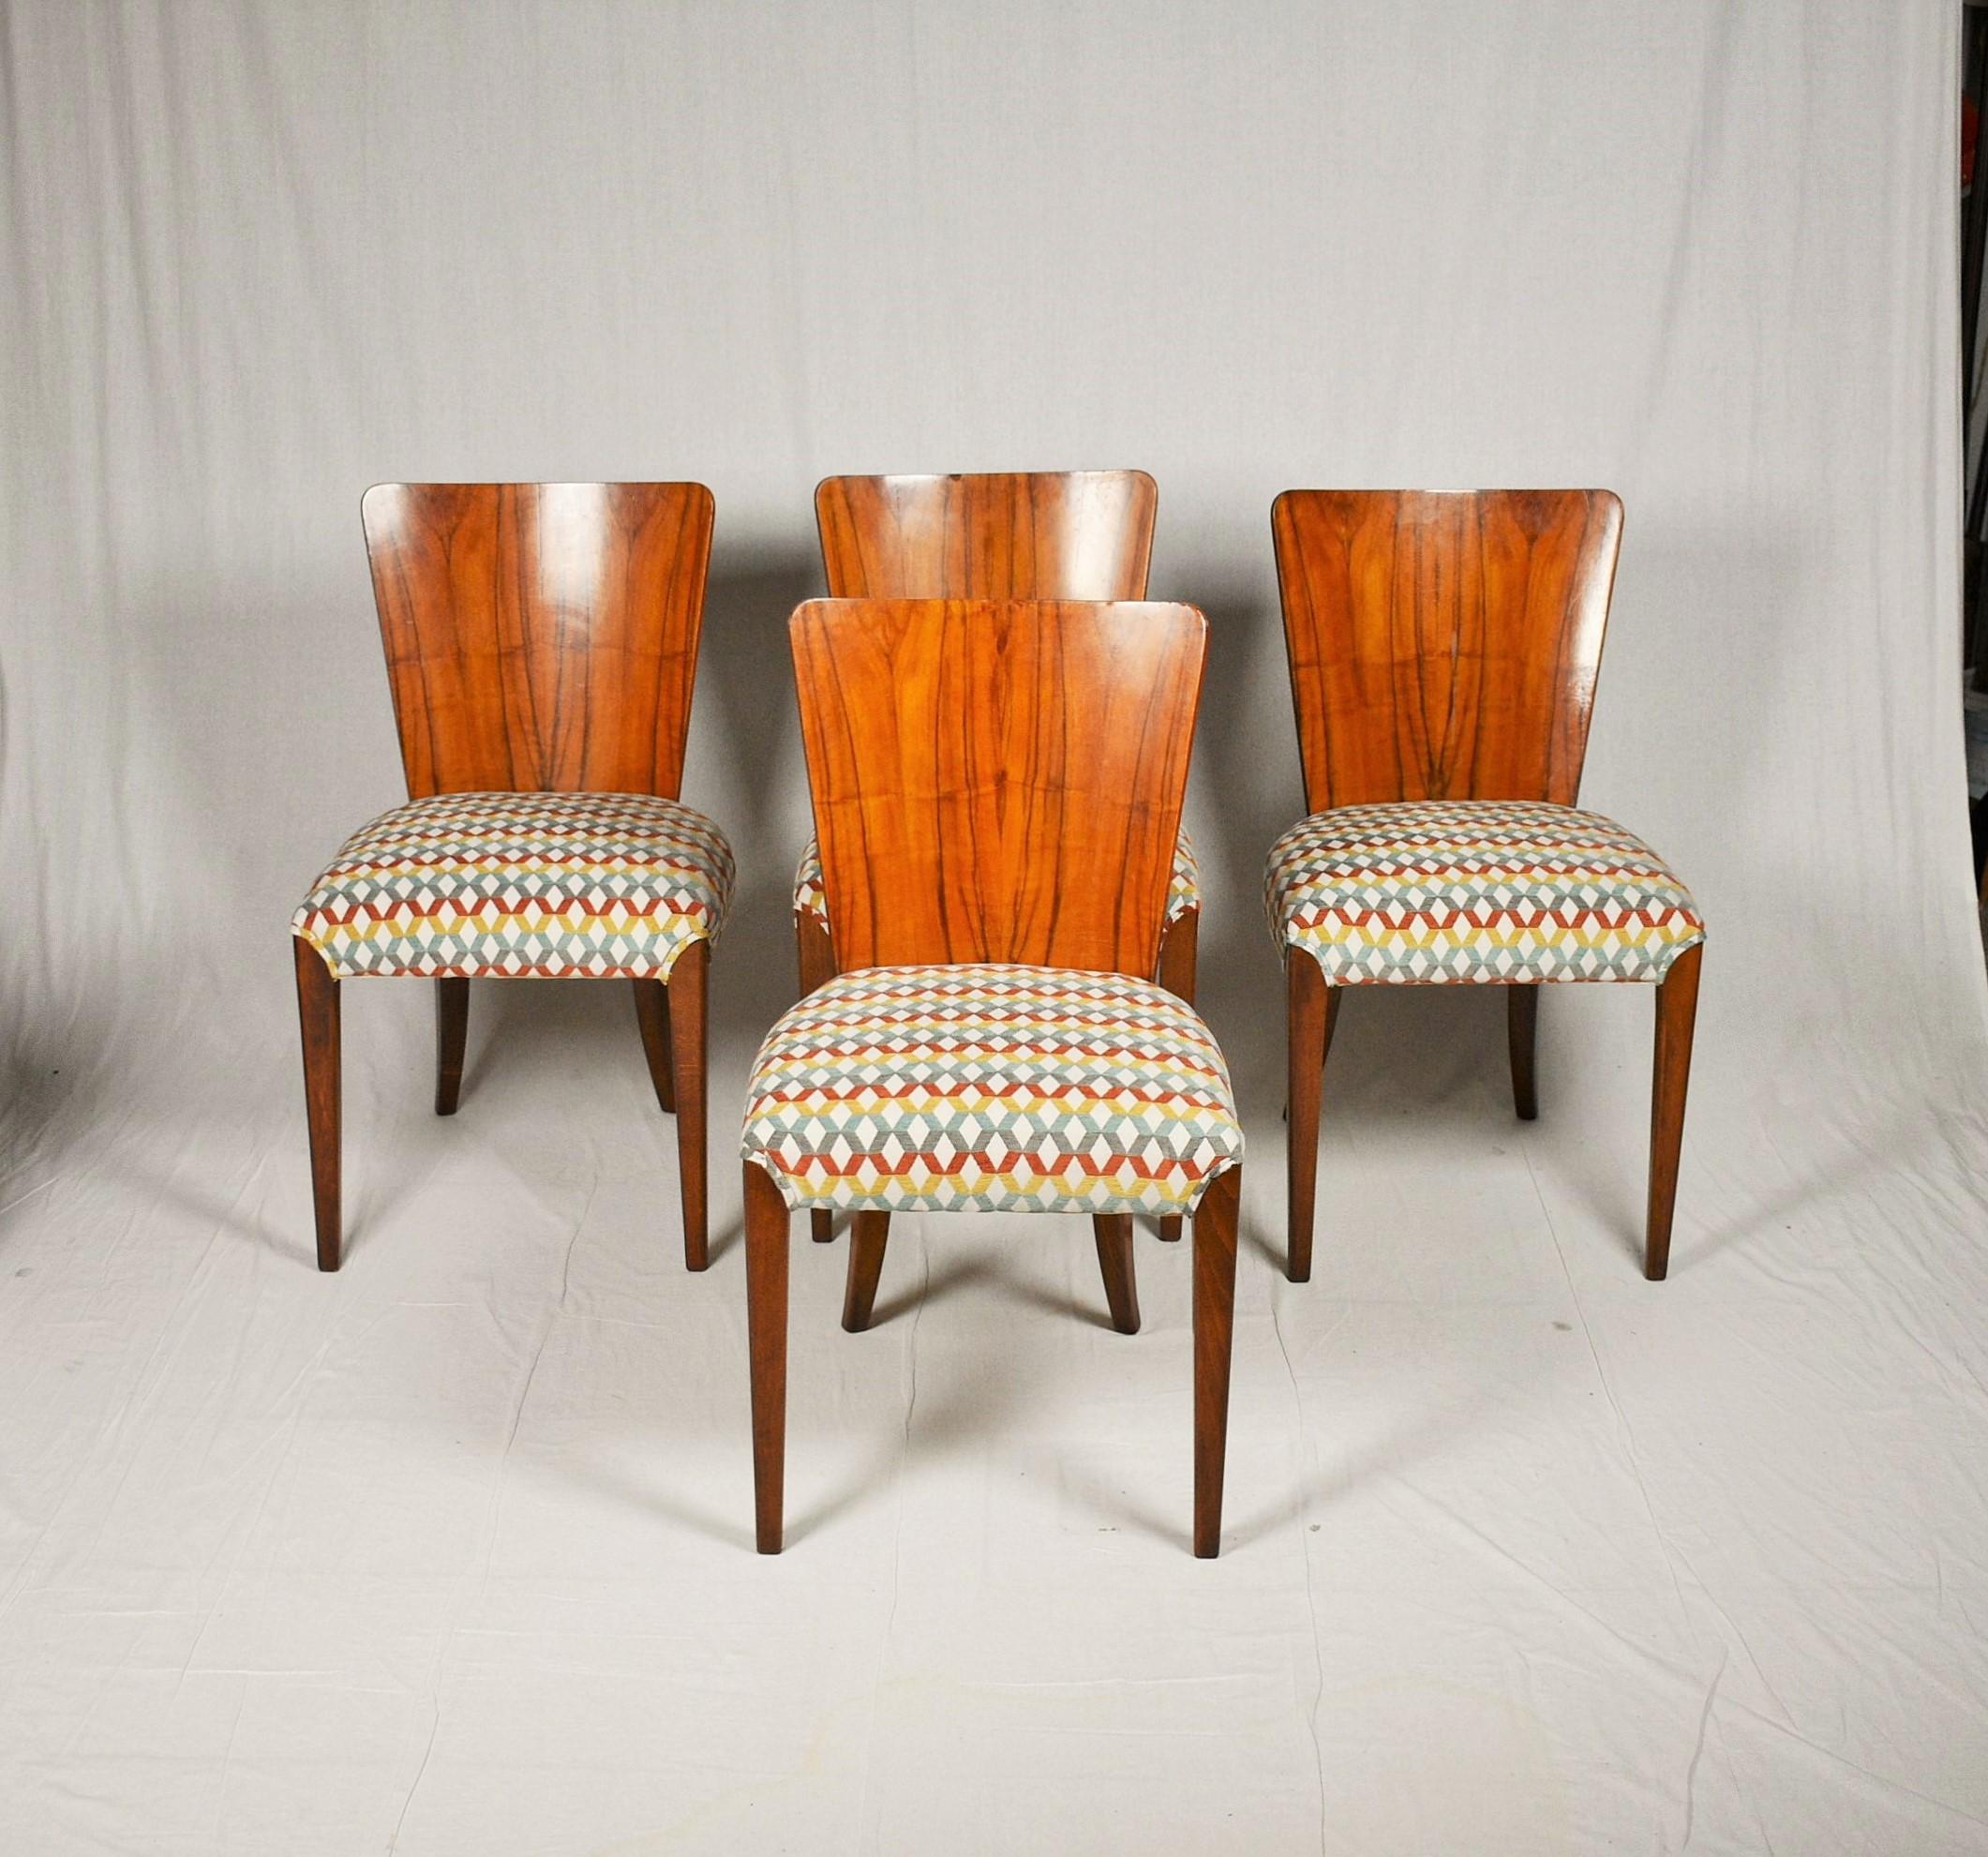 Set of four dining chairs, catalog number H-214, designed by Jindrich Halabala in the 1930s, manufactured in ÚP Závody in the 1950s. It features walnut veneer and new upholstery. The chairs are in good original condition. The wooden parts were